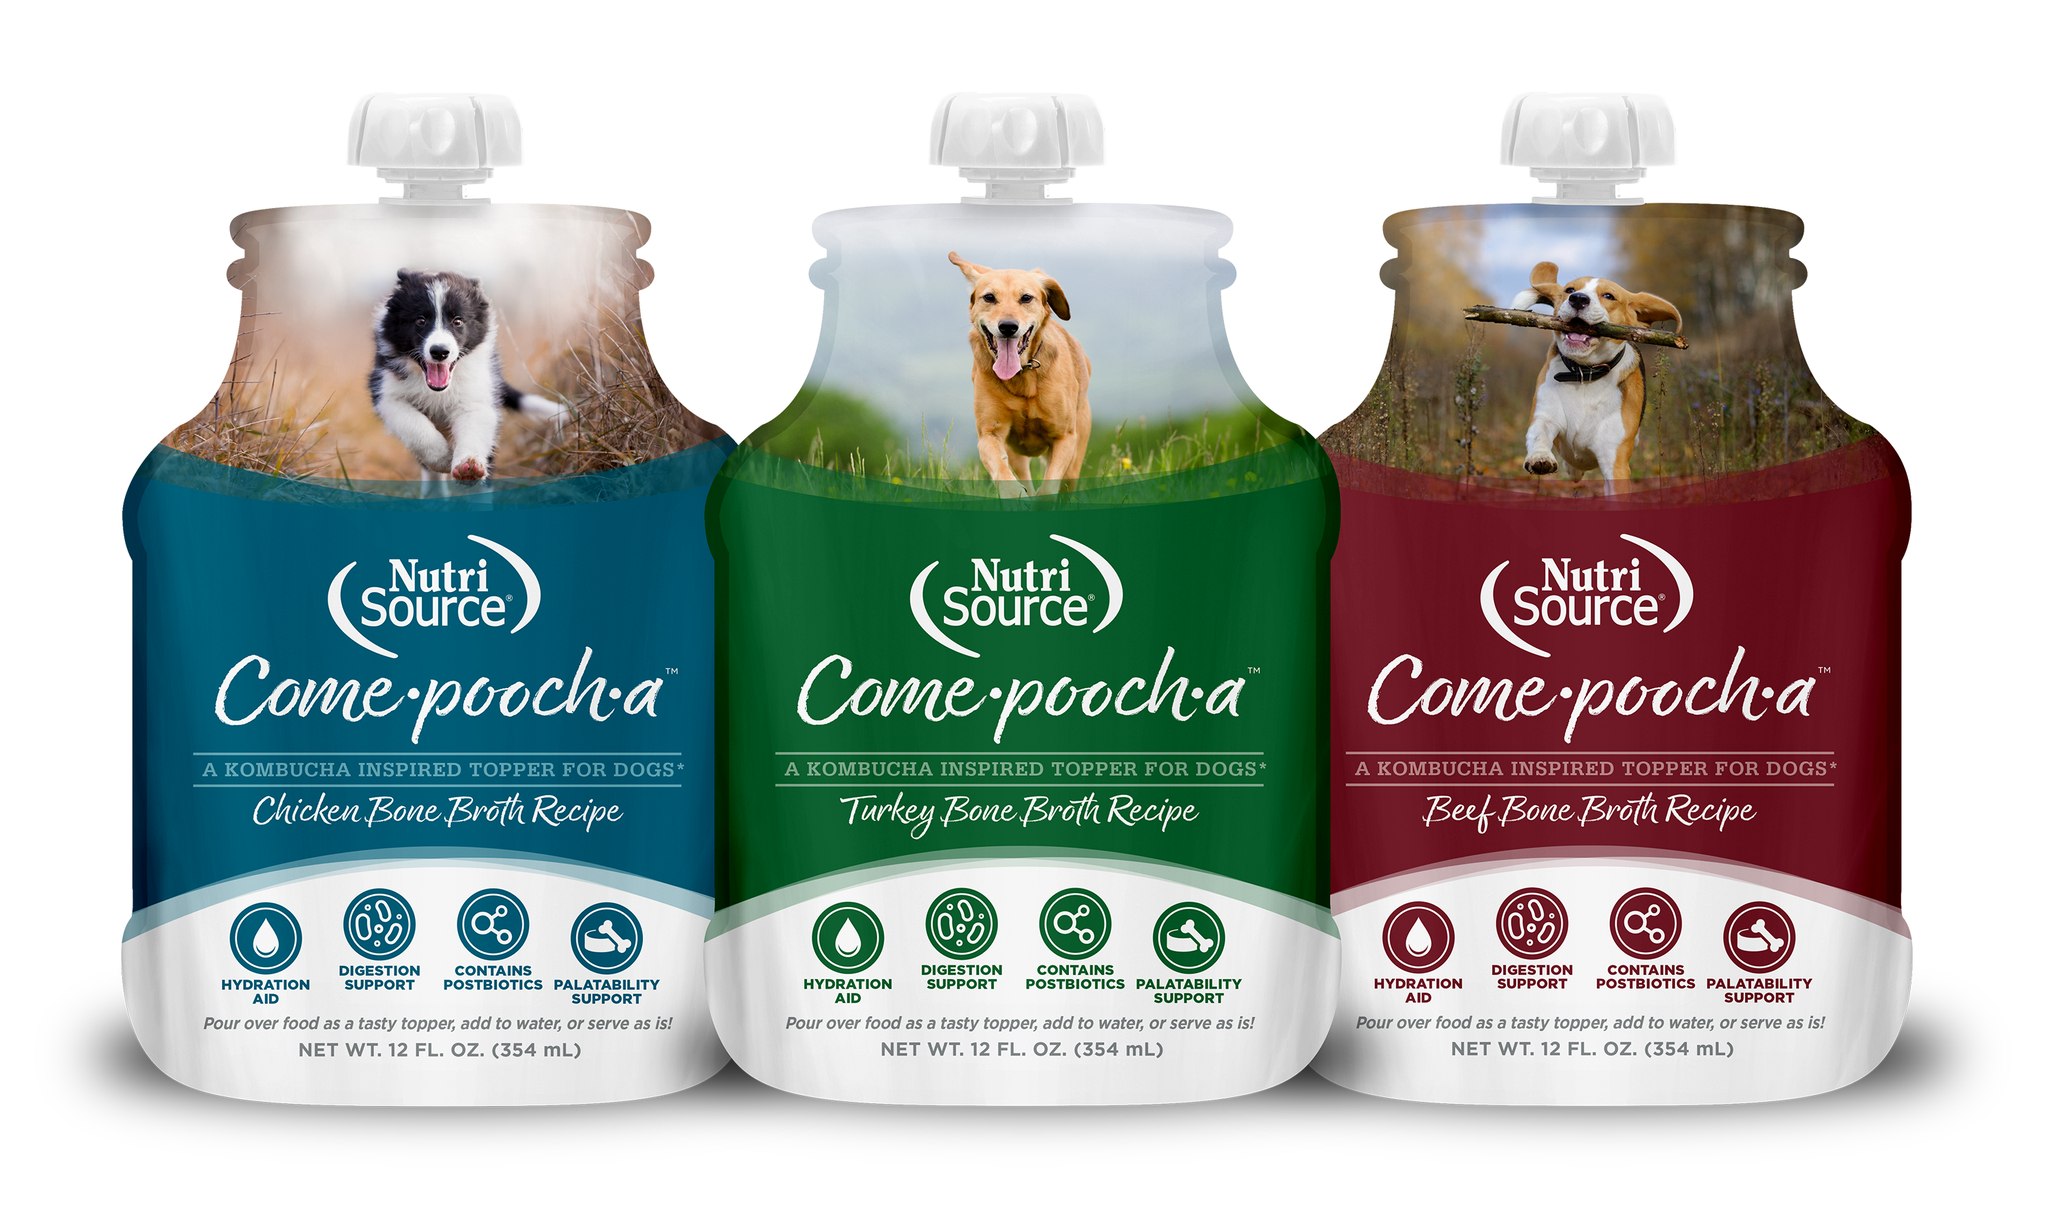 NutriSource Pet Foods' Come-pooch-a dog food toppers